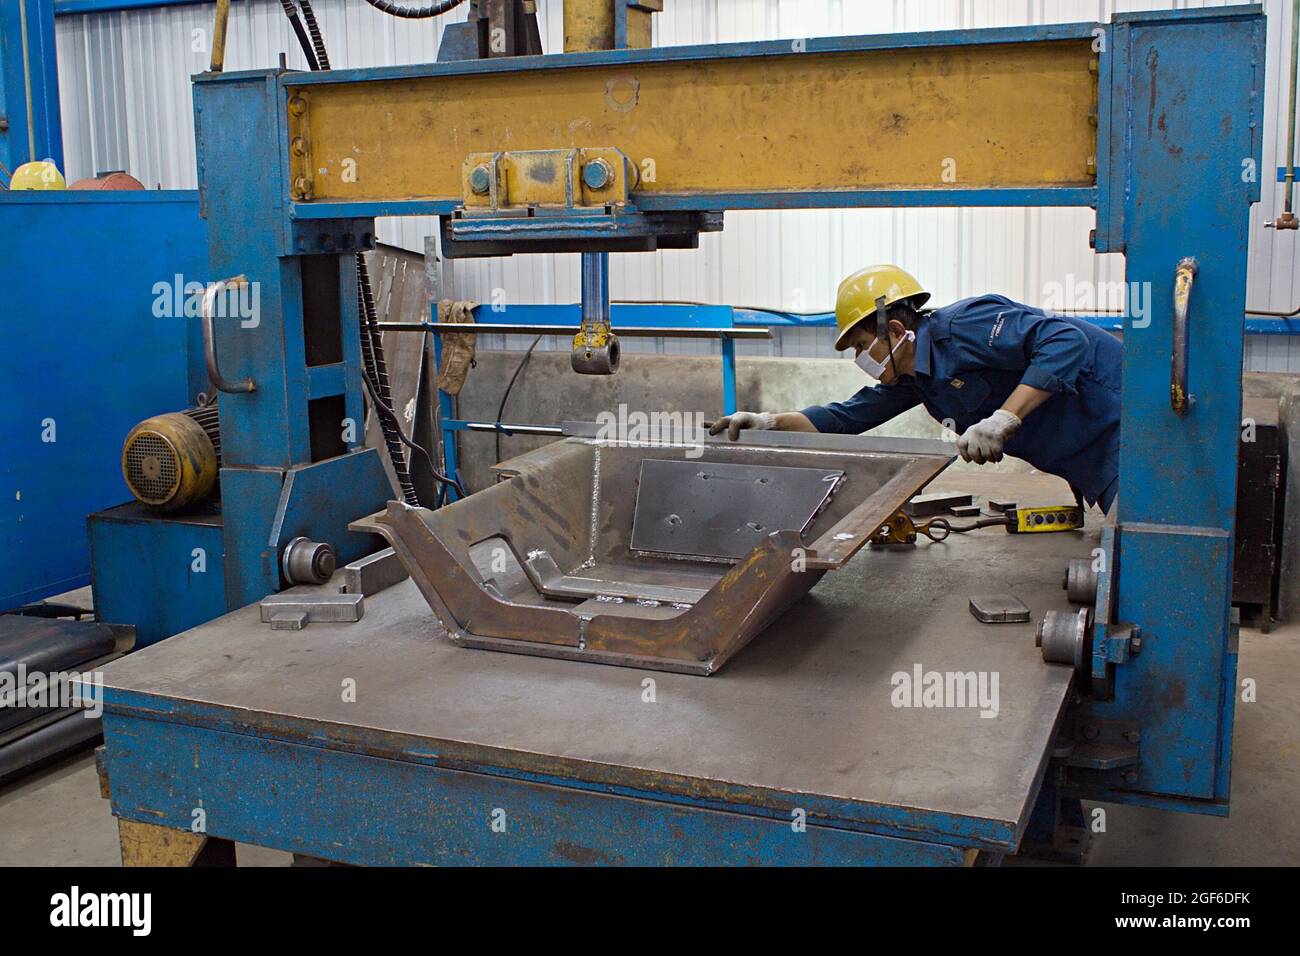 A technician is measuring a prototype tool in a fabrication workshop. Stock Photo